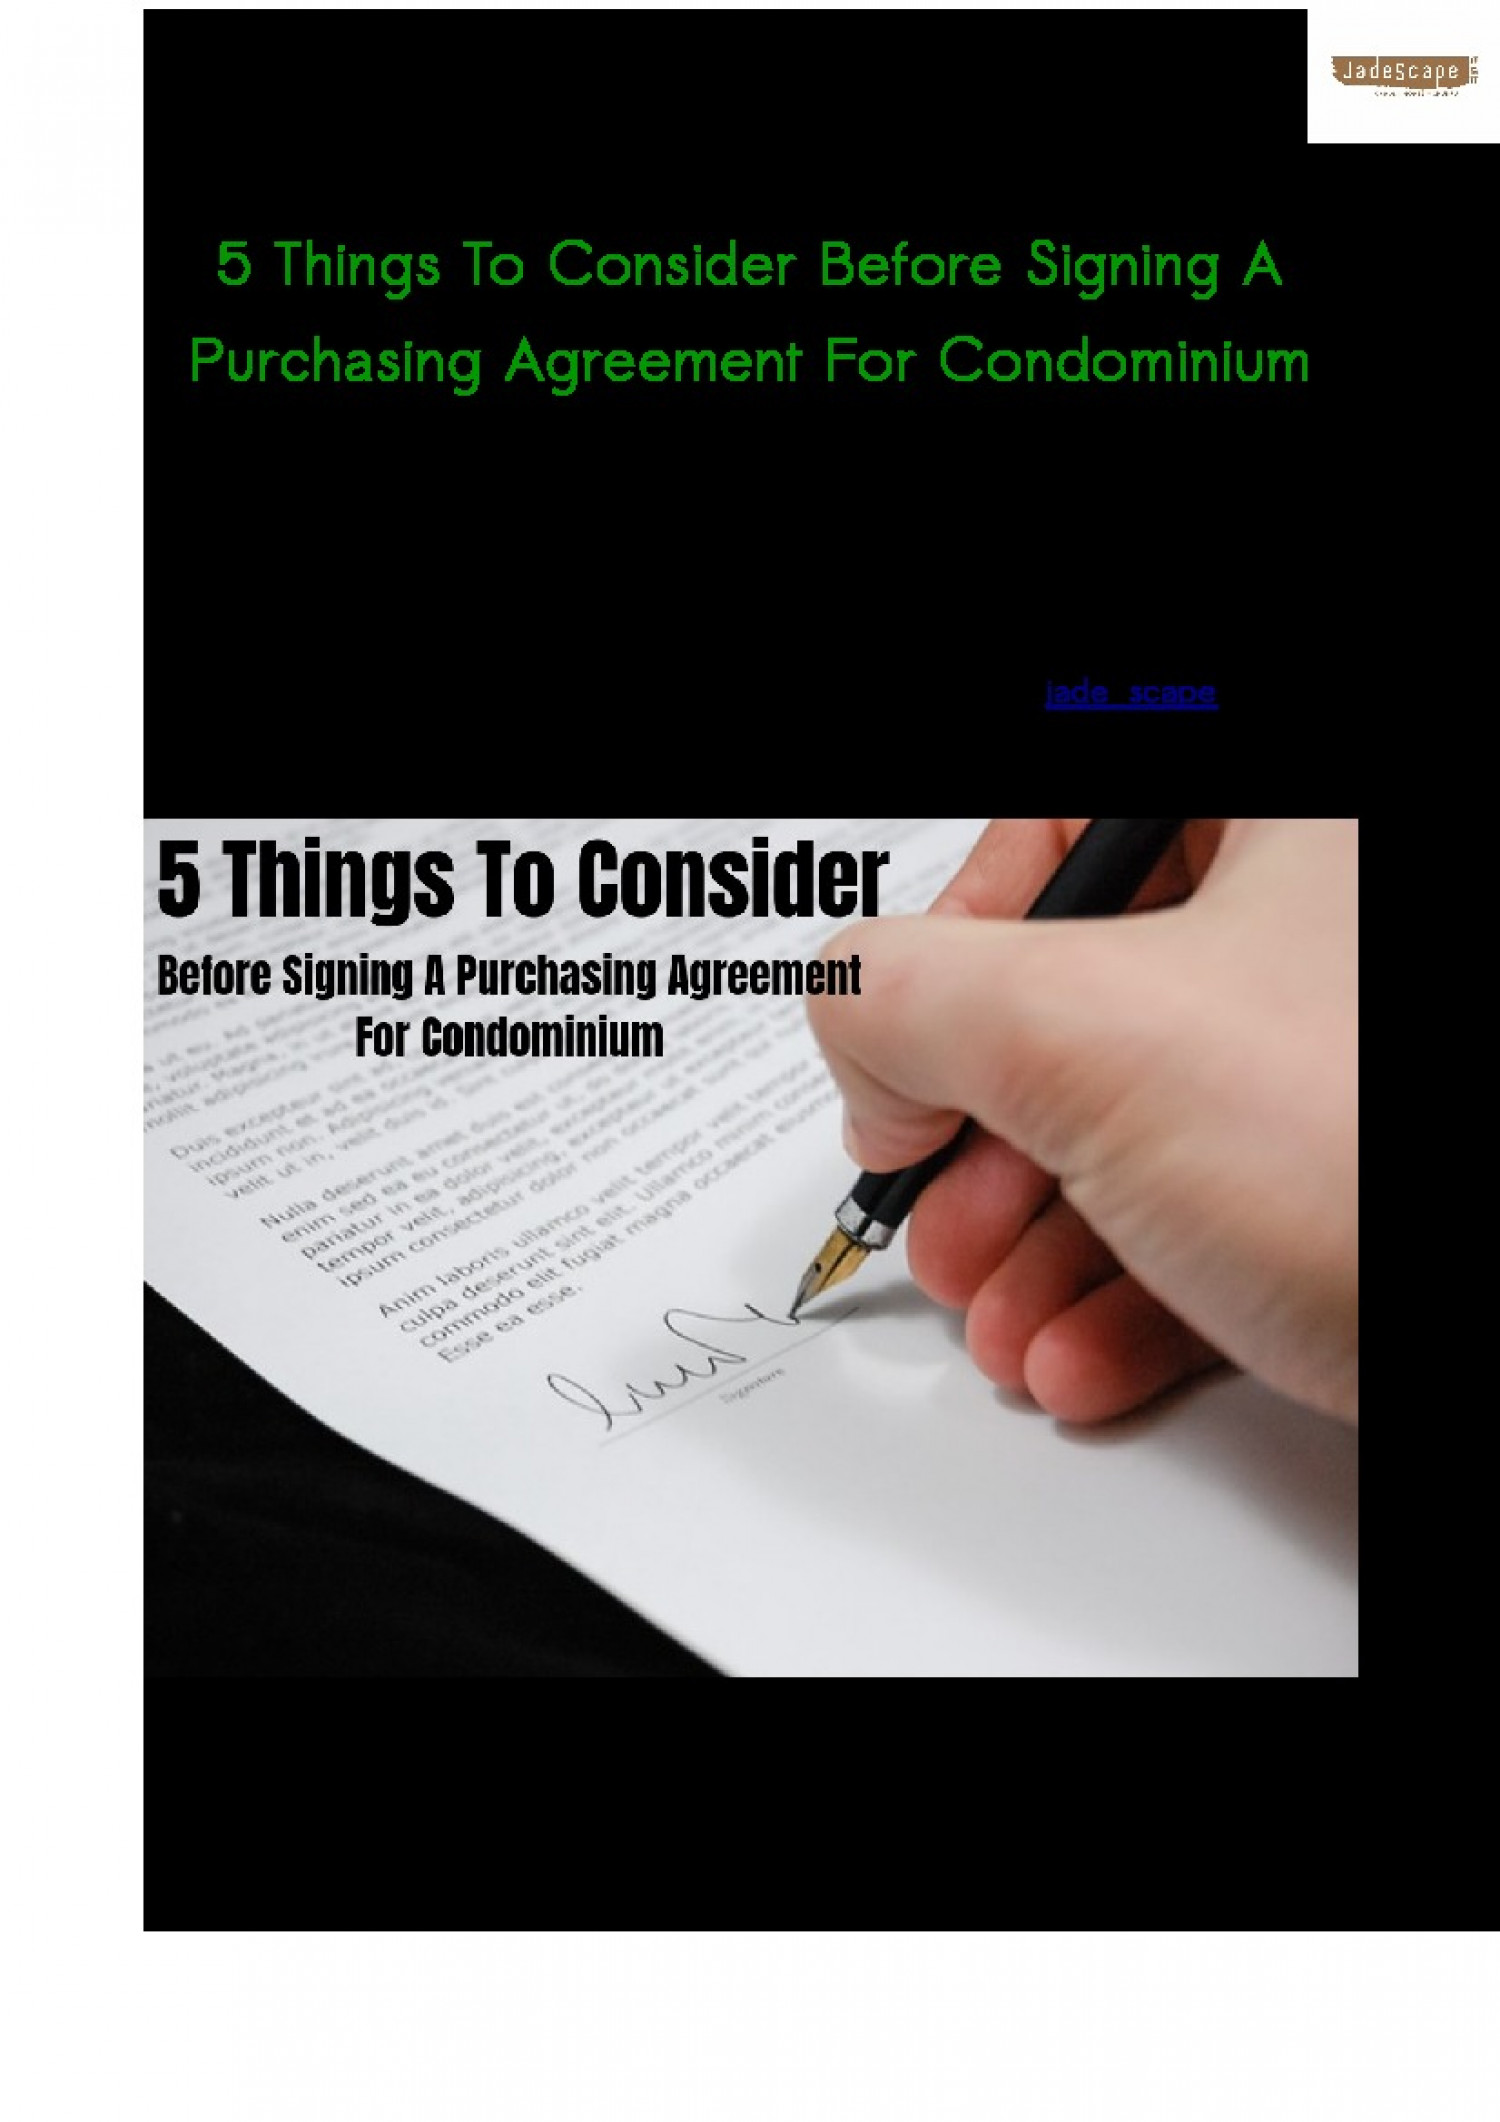 5 Things To Consider Before Signing A Purchasing Agreement For Condominium Infographic